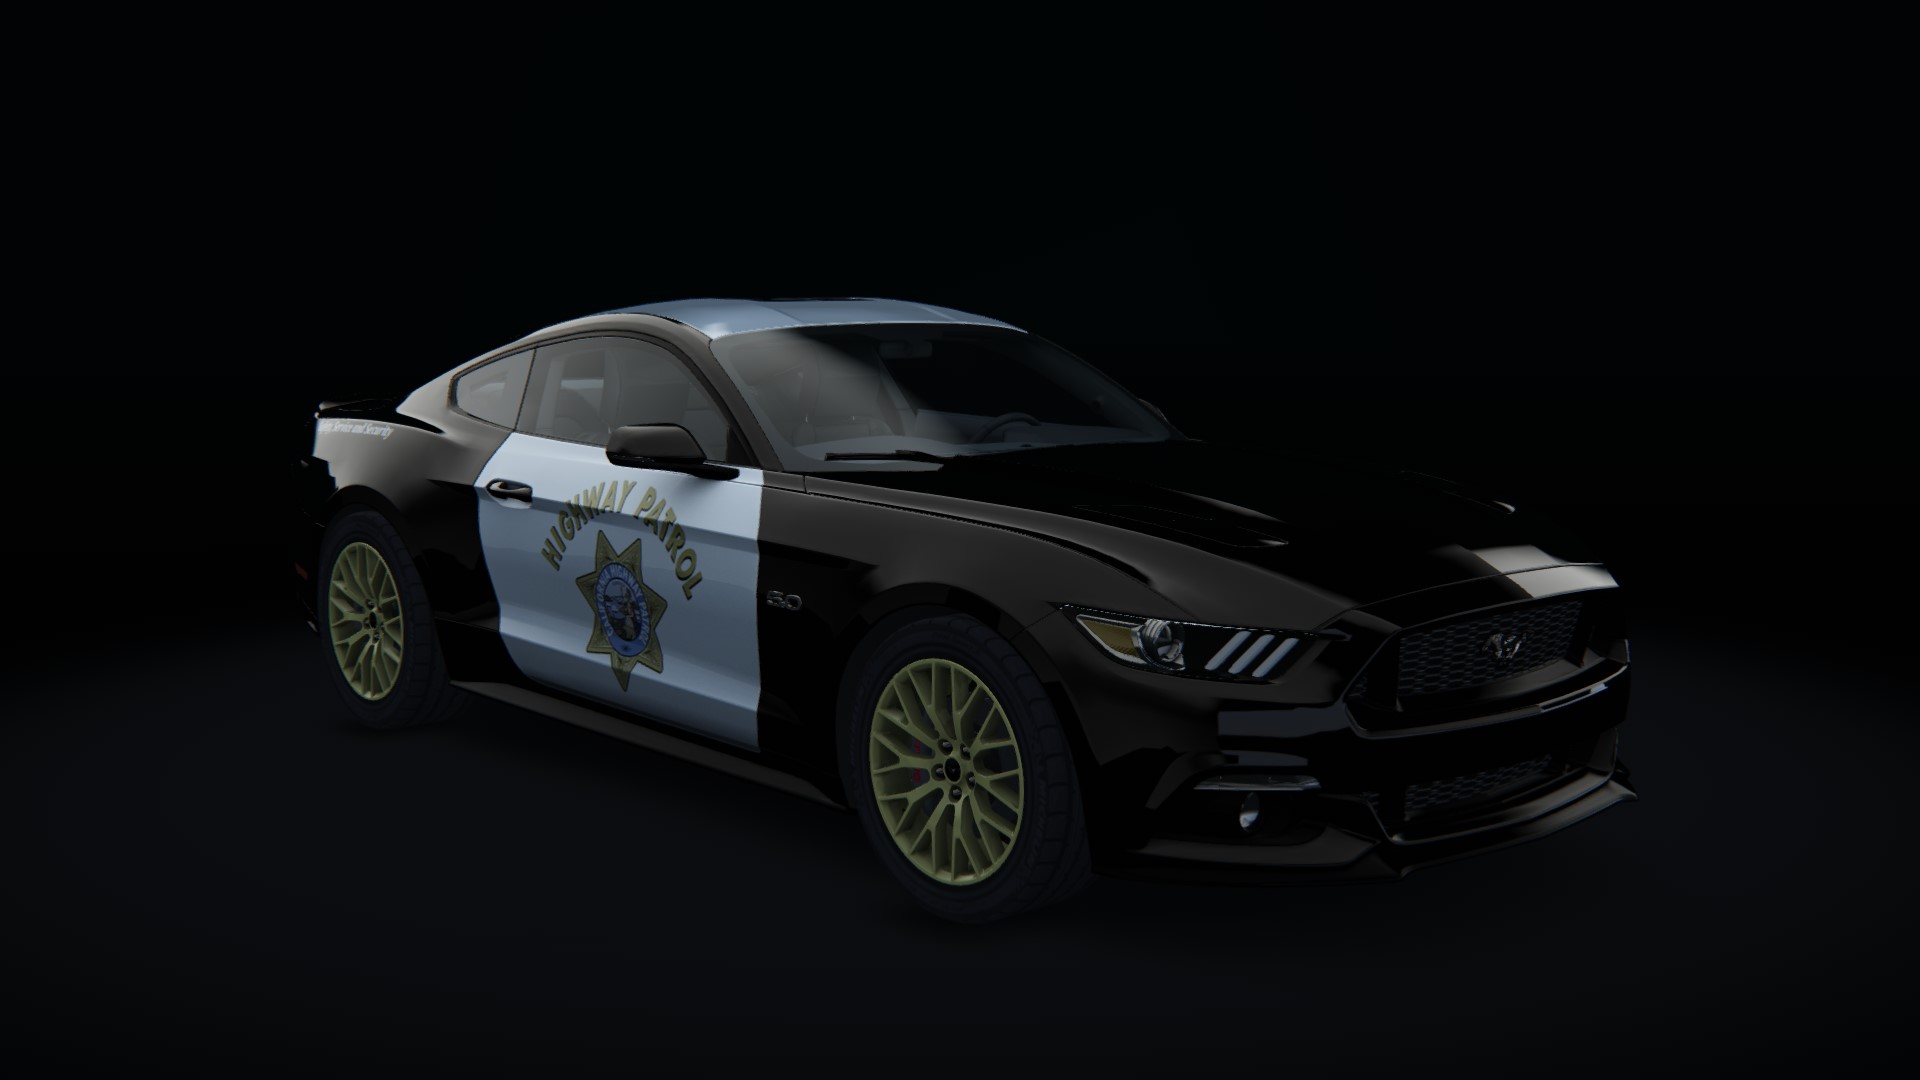 Ford Mustang 2015, skin chp_unit_77